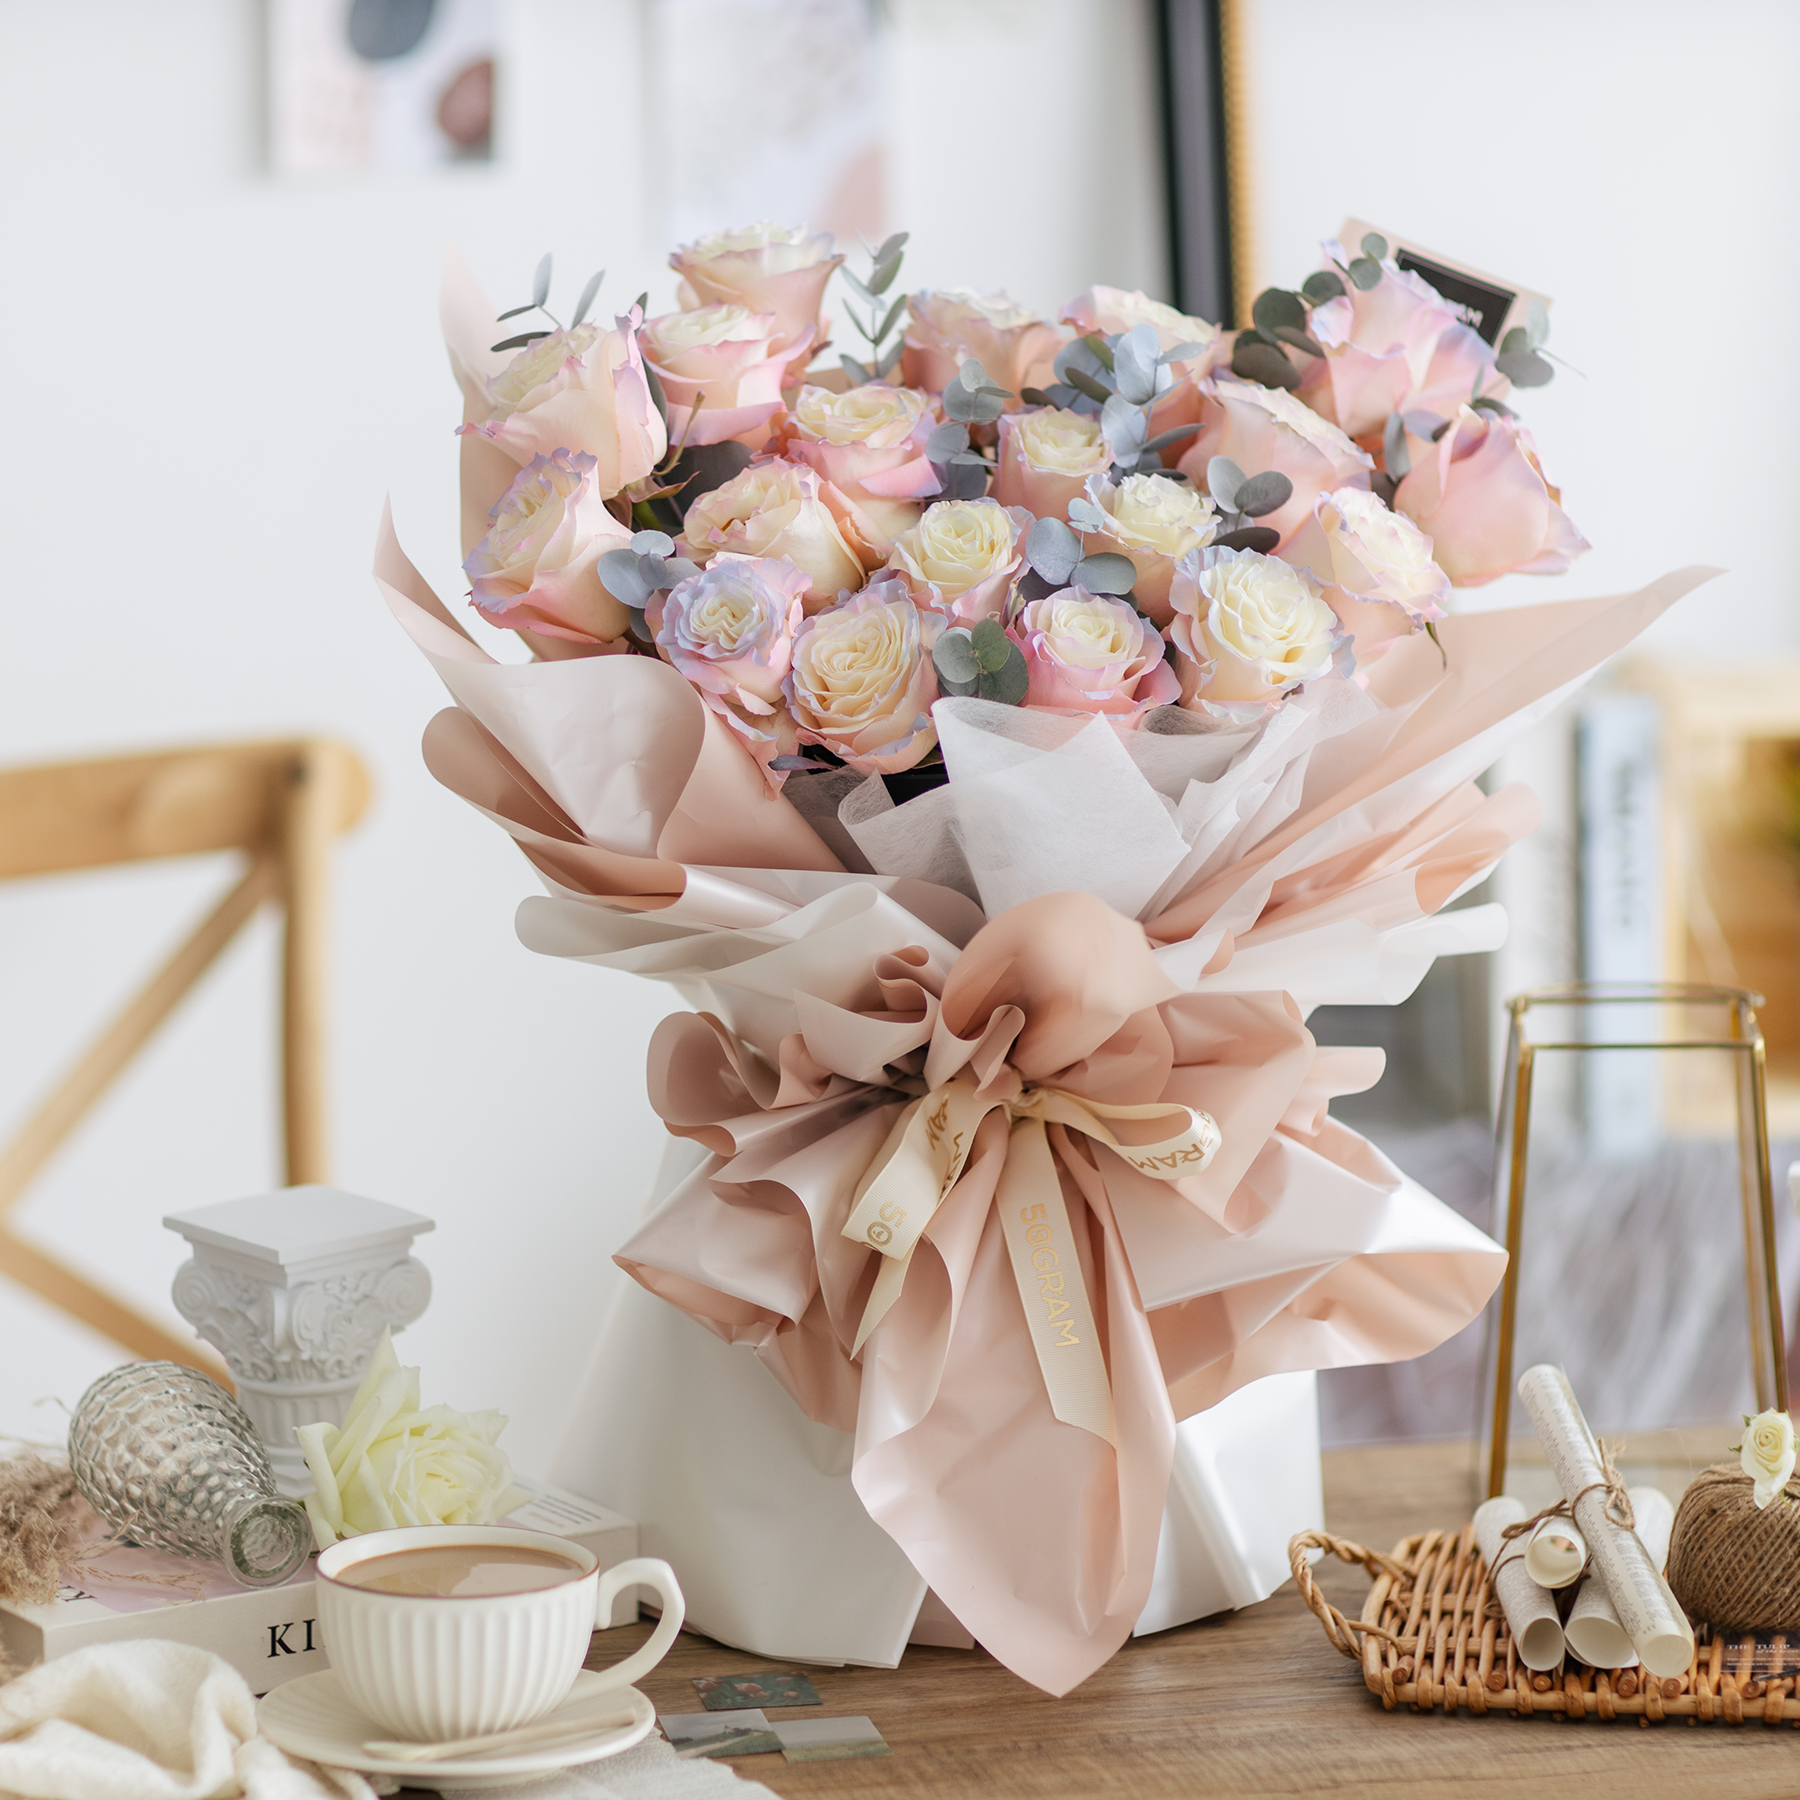 Gradience Rosy Roses Bouquet – Large